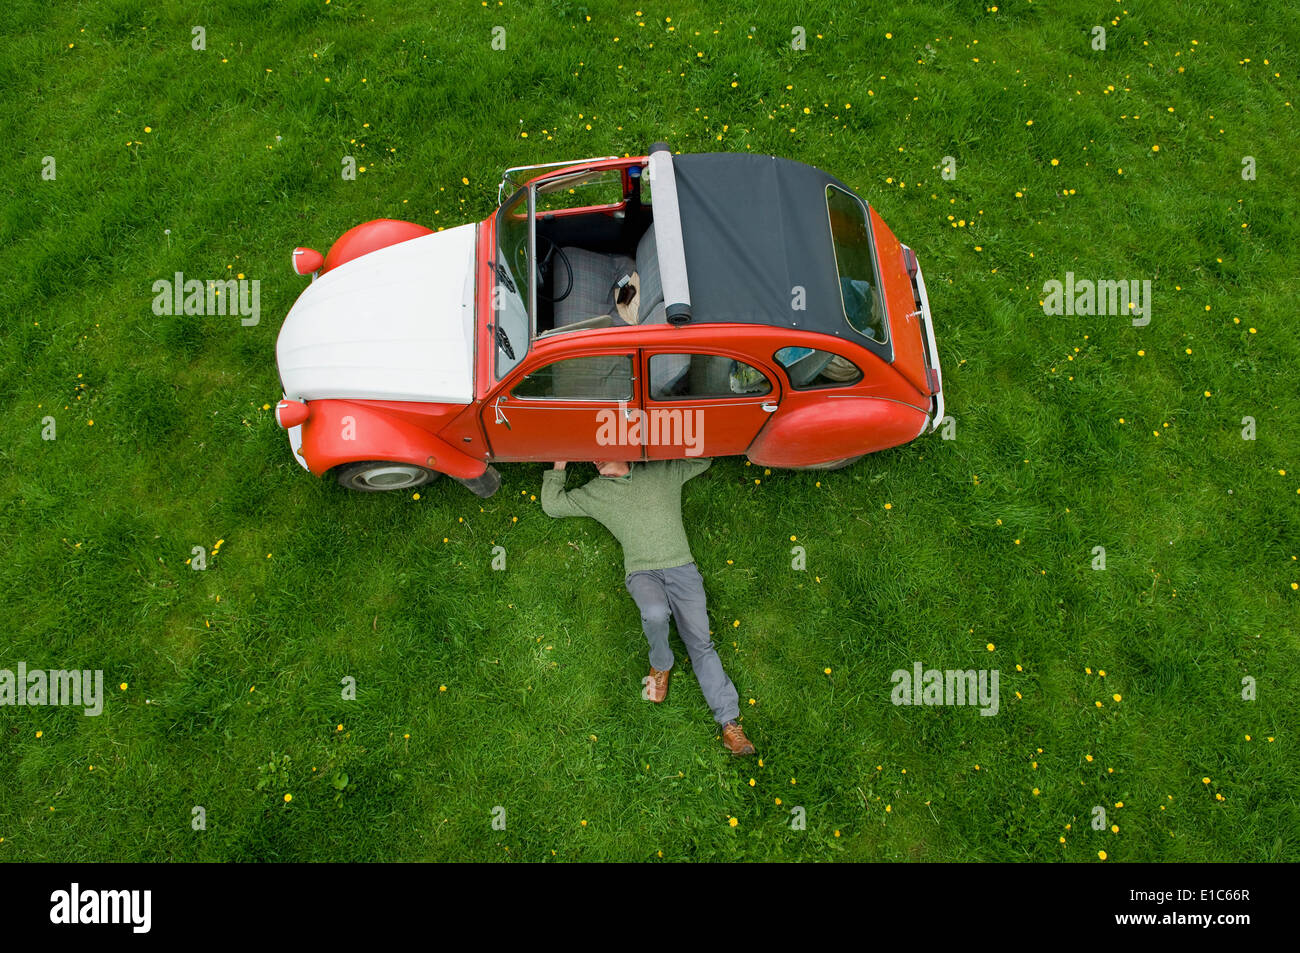 A man lying on his back under a red car, inspecting the underside of the car. Stock Photo